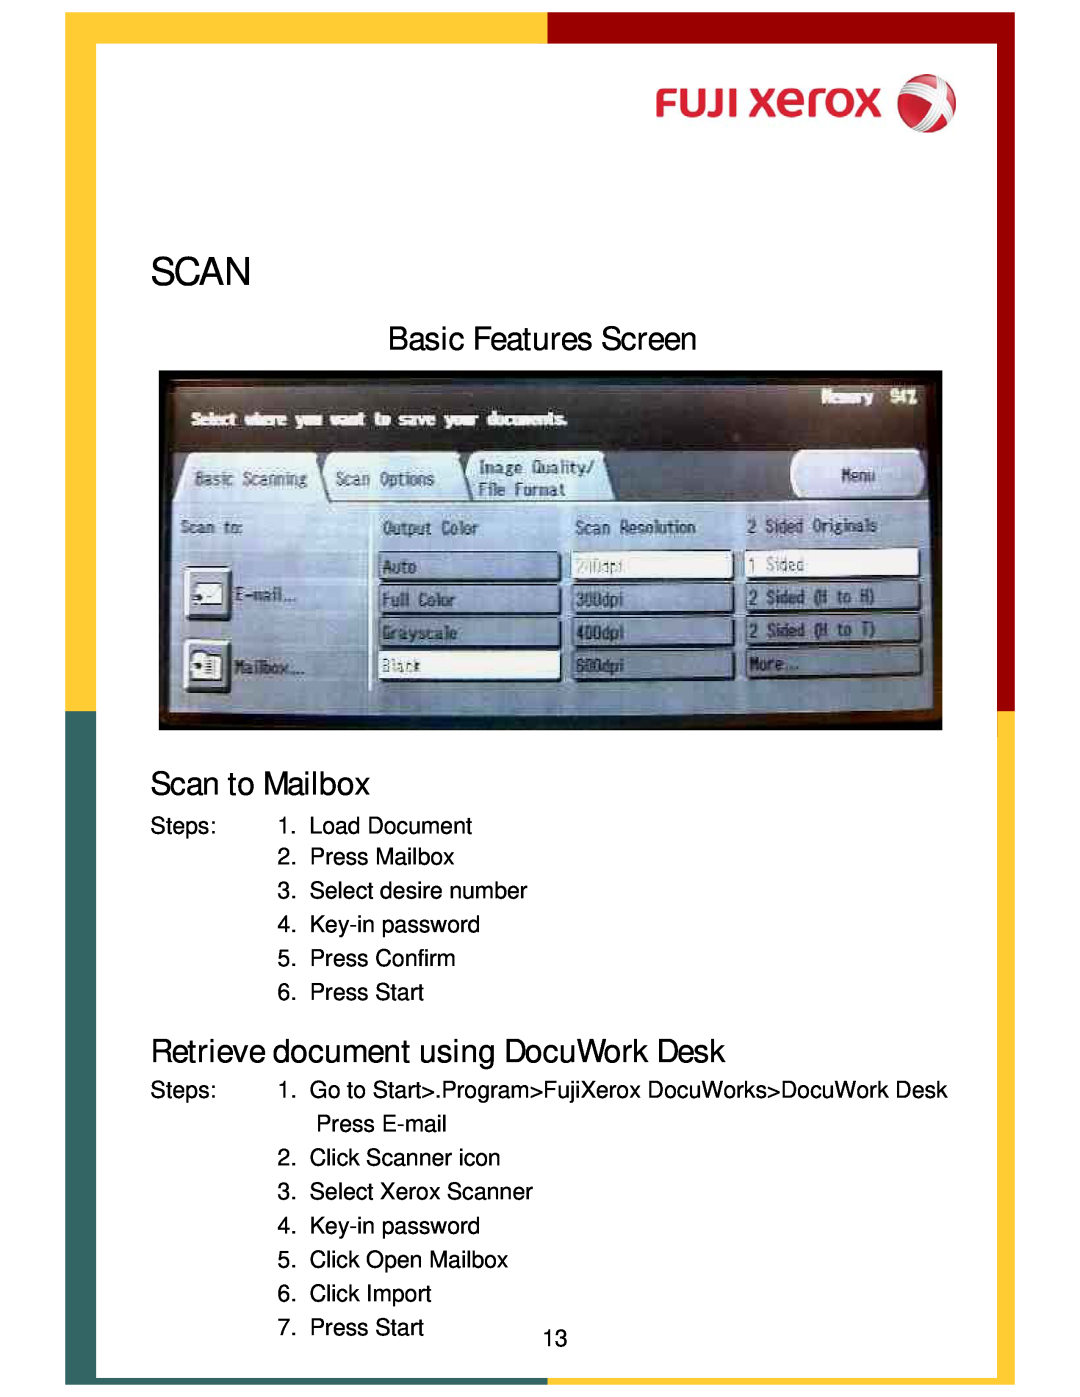 Xerox DCC400, 320 manual Basic Features Screen Scan to Mailbox, Retrieve document using DocuWork Desk 